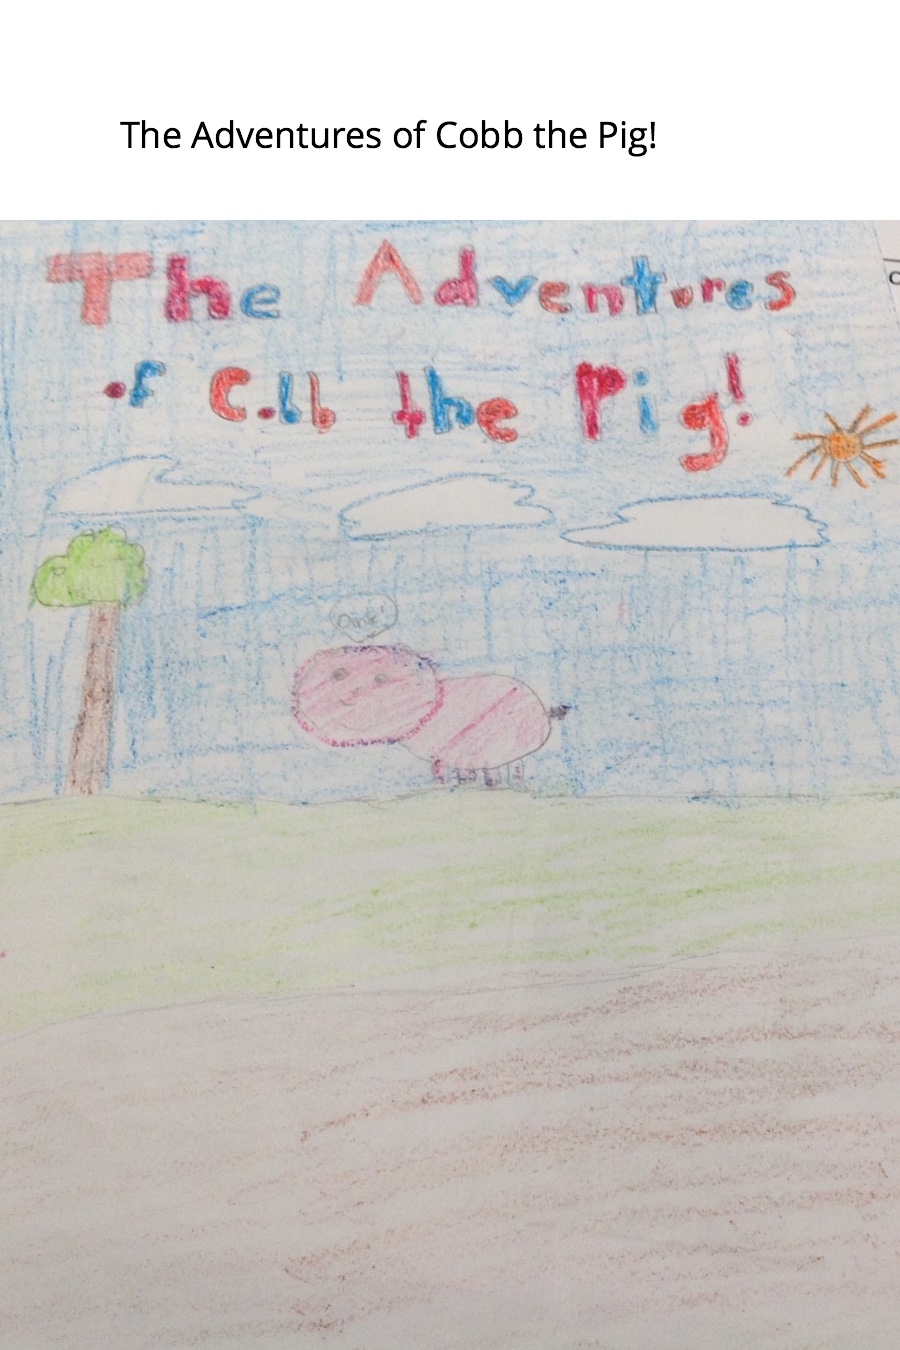 The Adventures of Cobb the Pig by Eli K